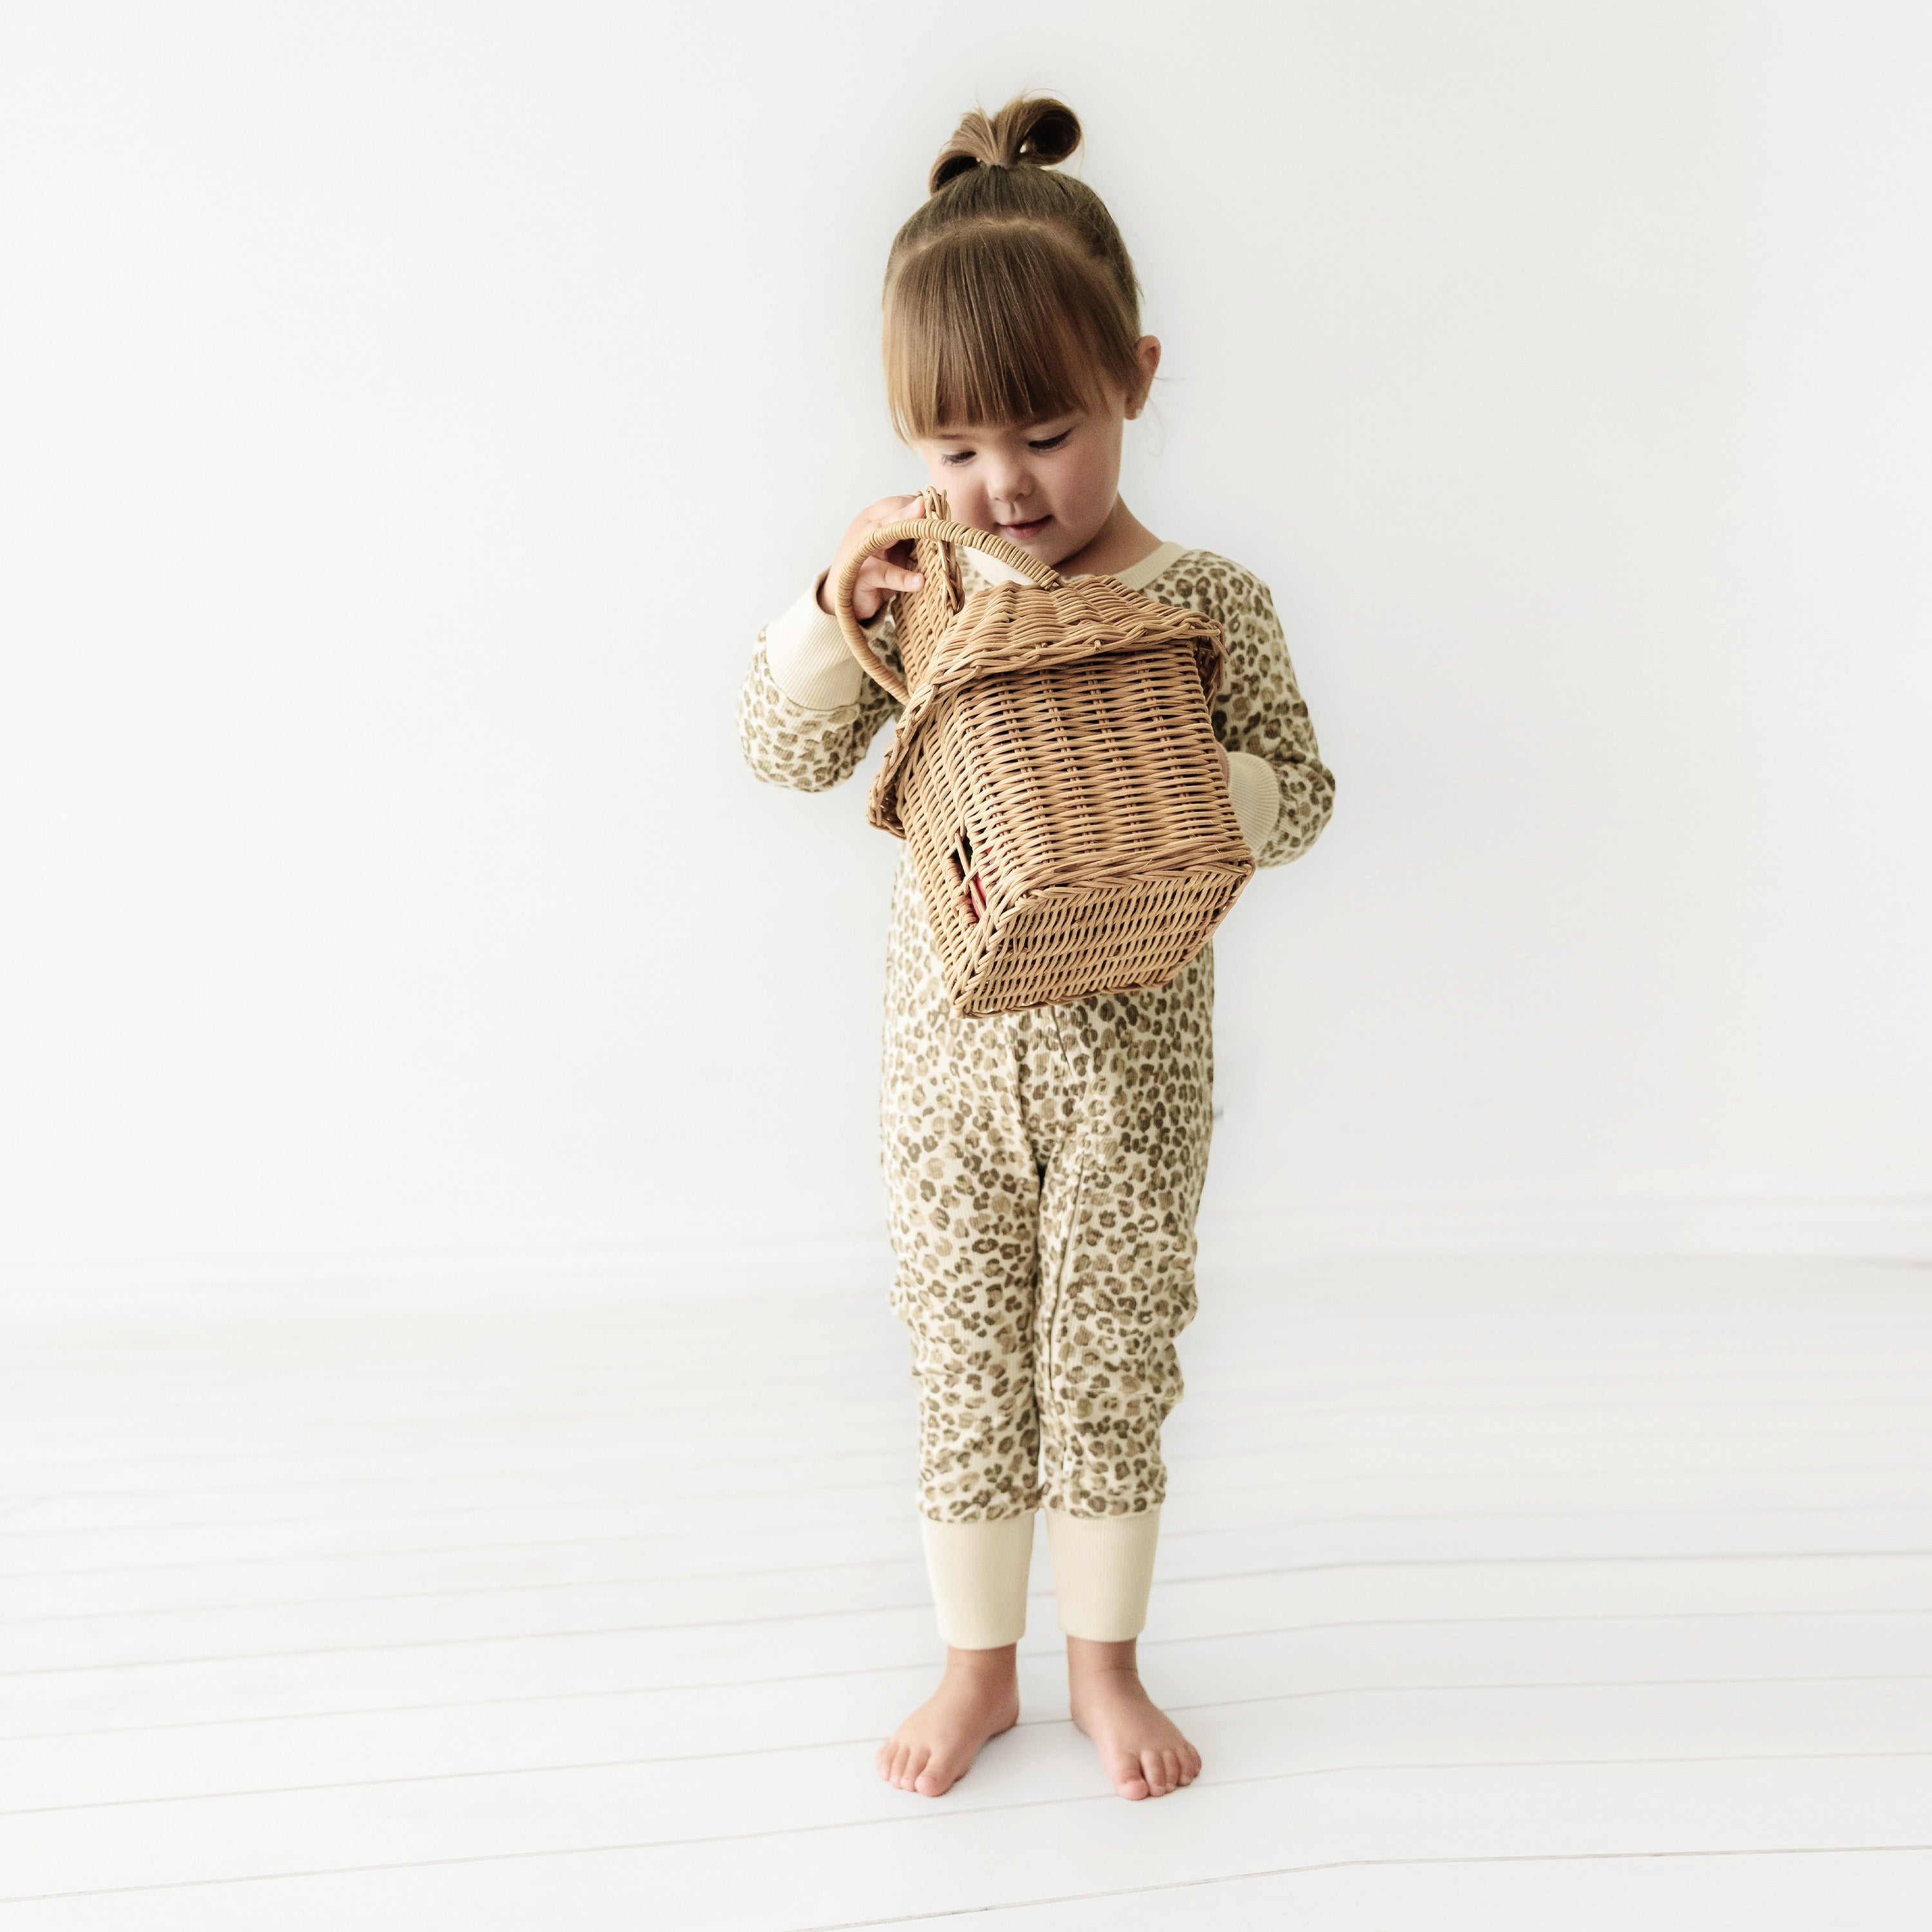 A young child with a cute topknot hairstyle, wearing an Organic Baby leopard print onesie, curiously examines a wicker basket in a bright, white room.